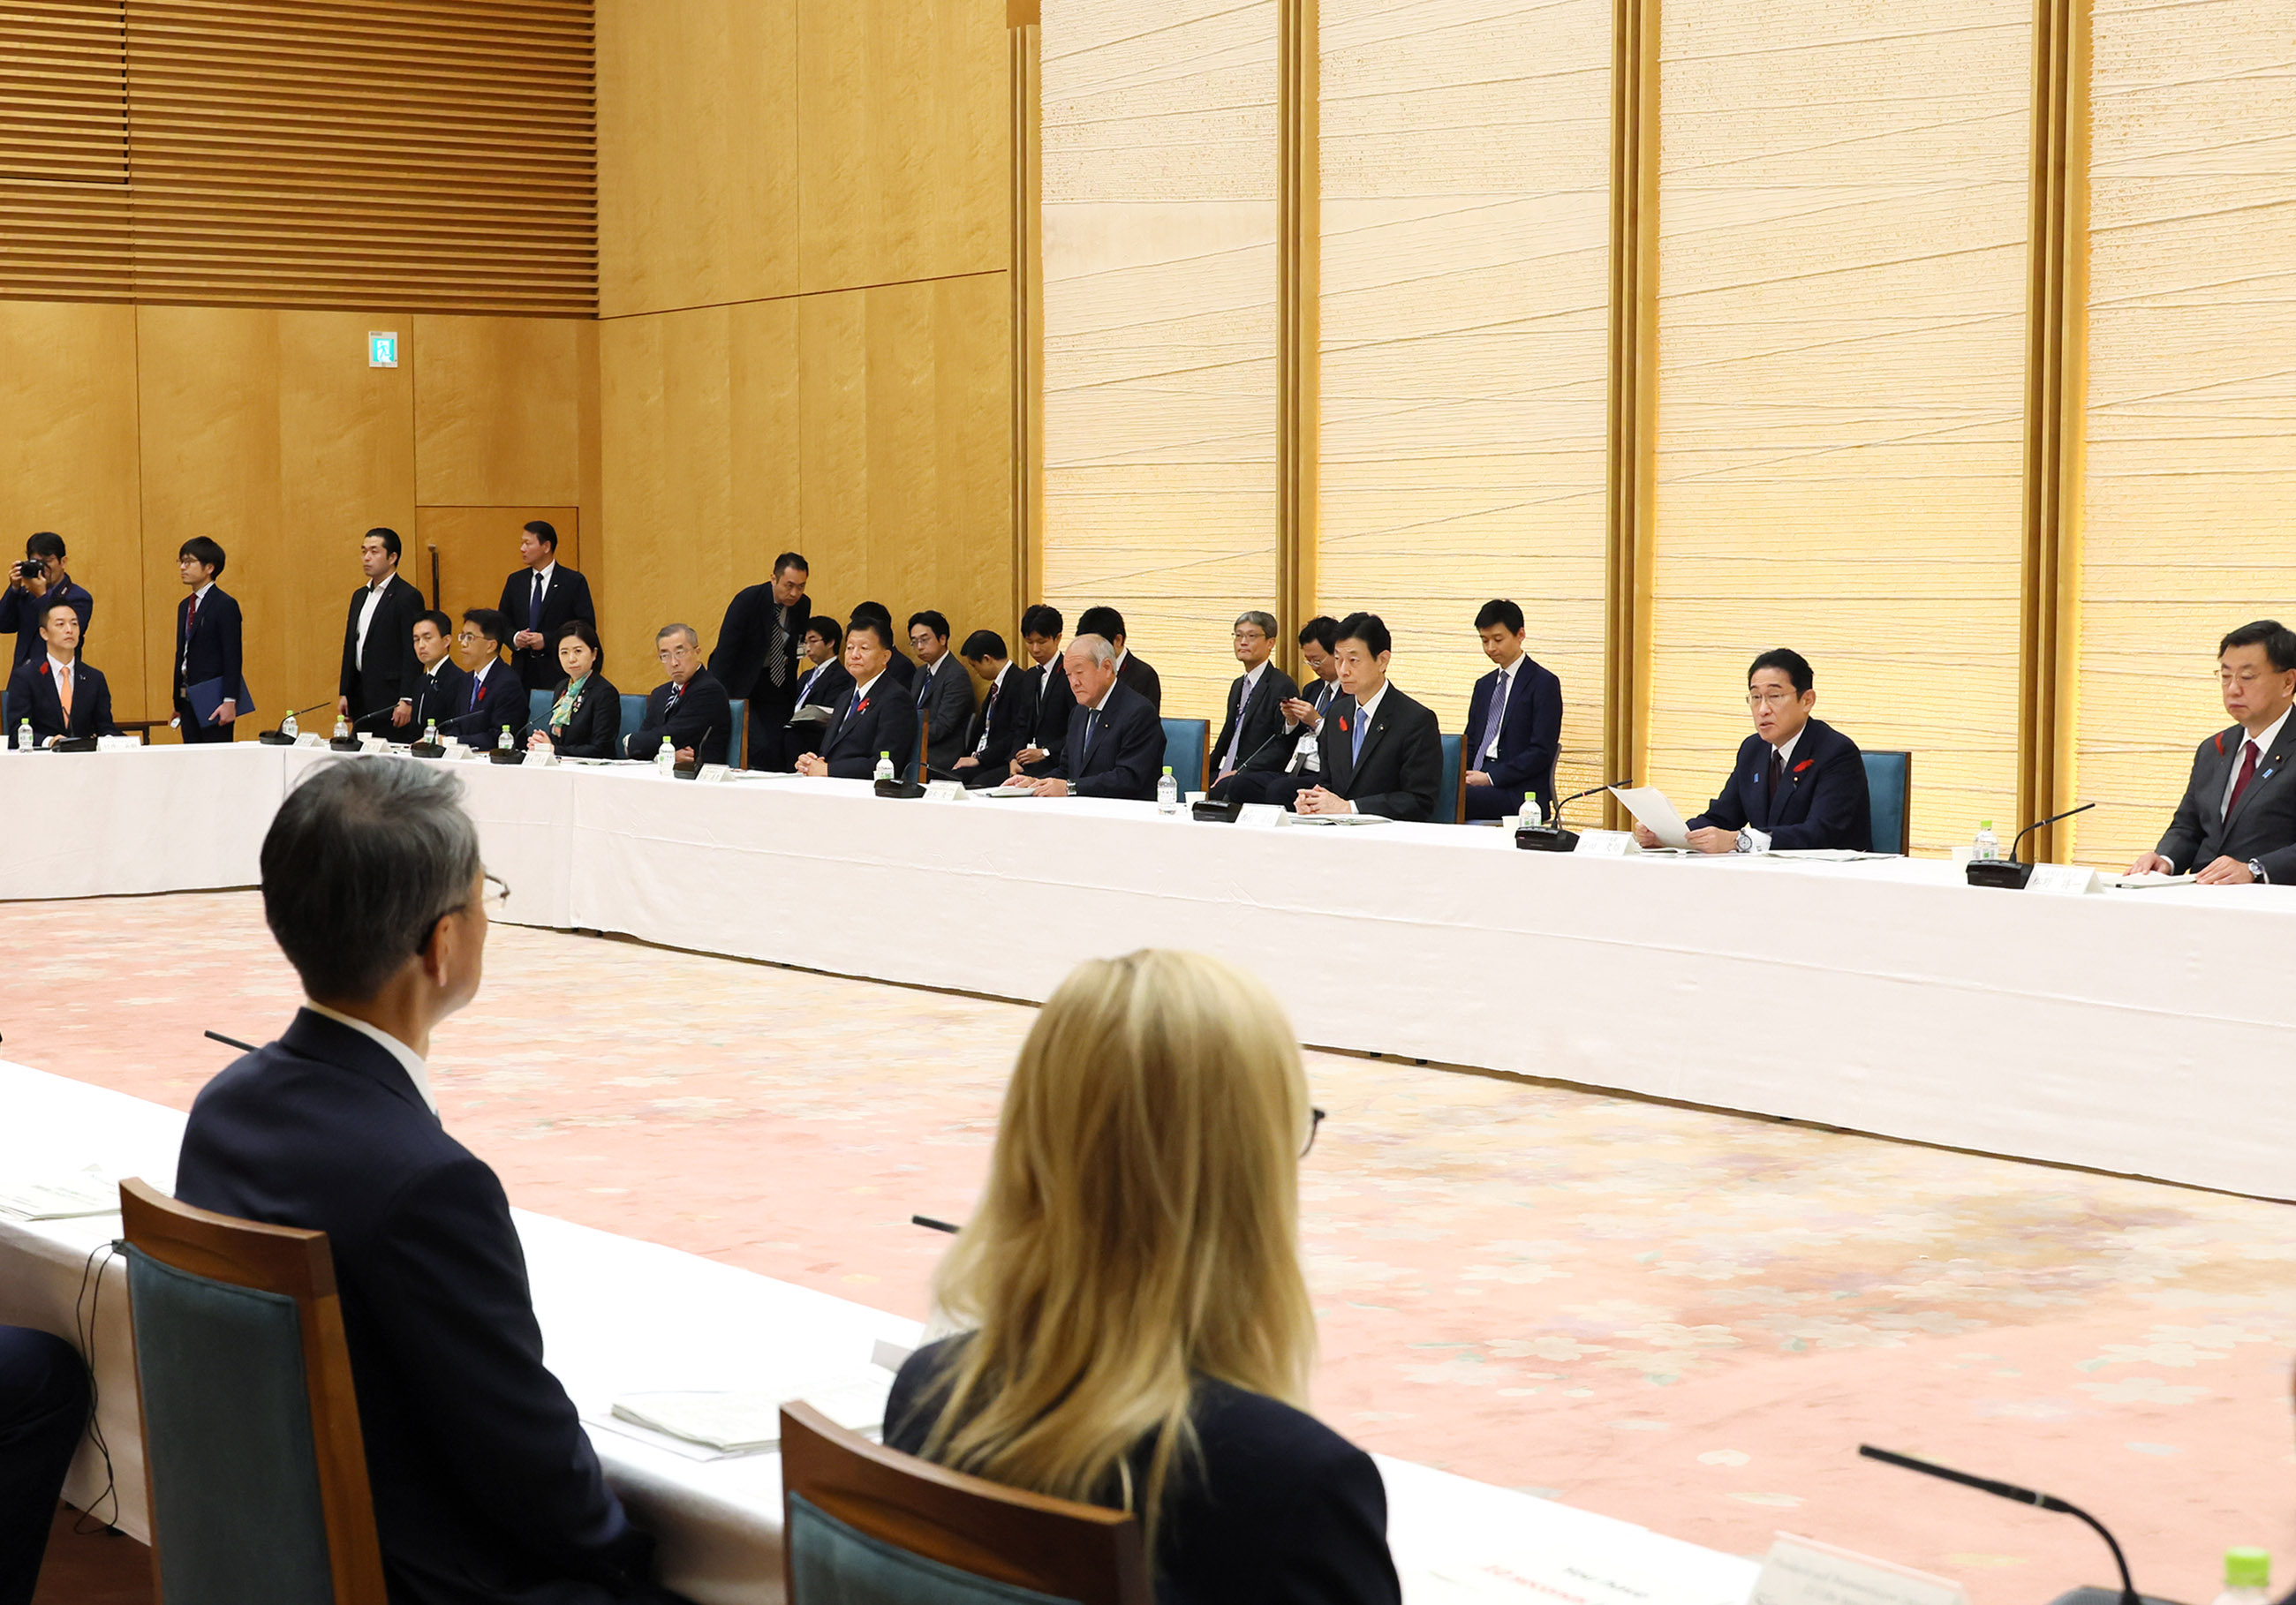 Prime Minister Kishida wrapping up the meeting (4)